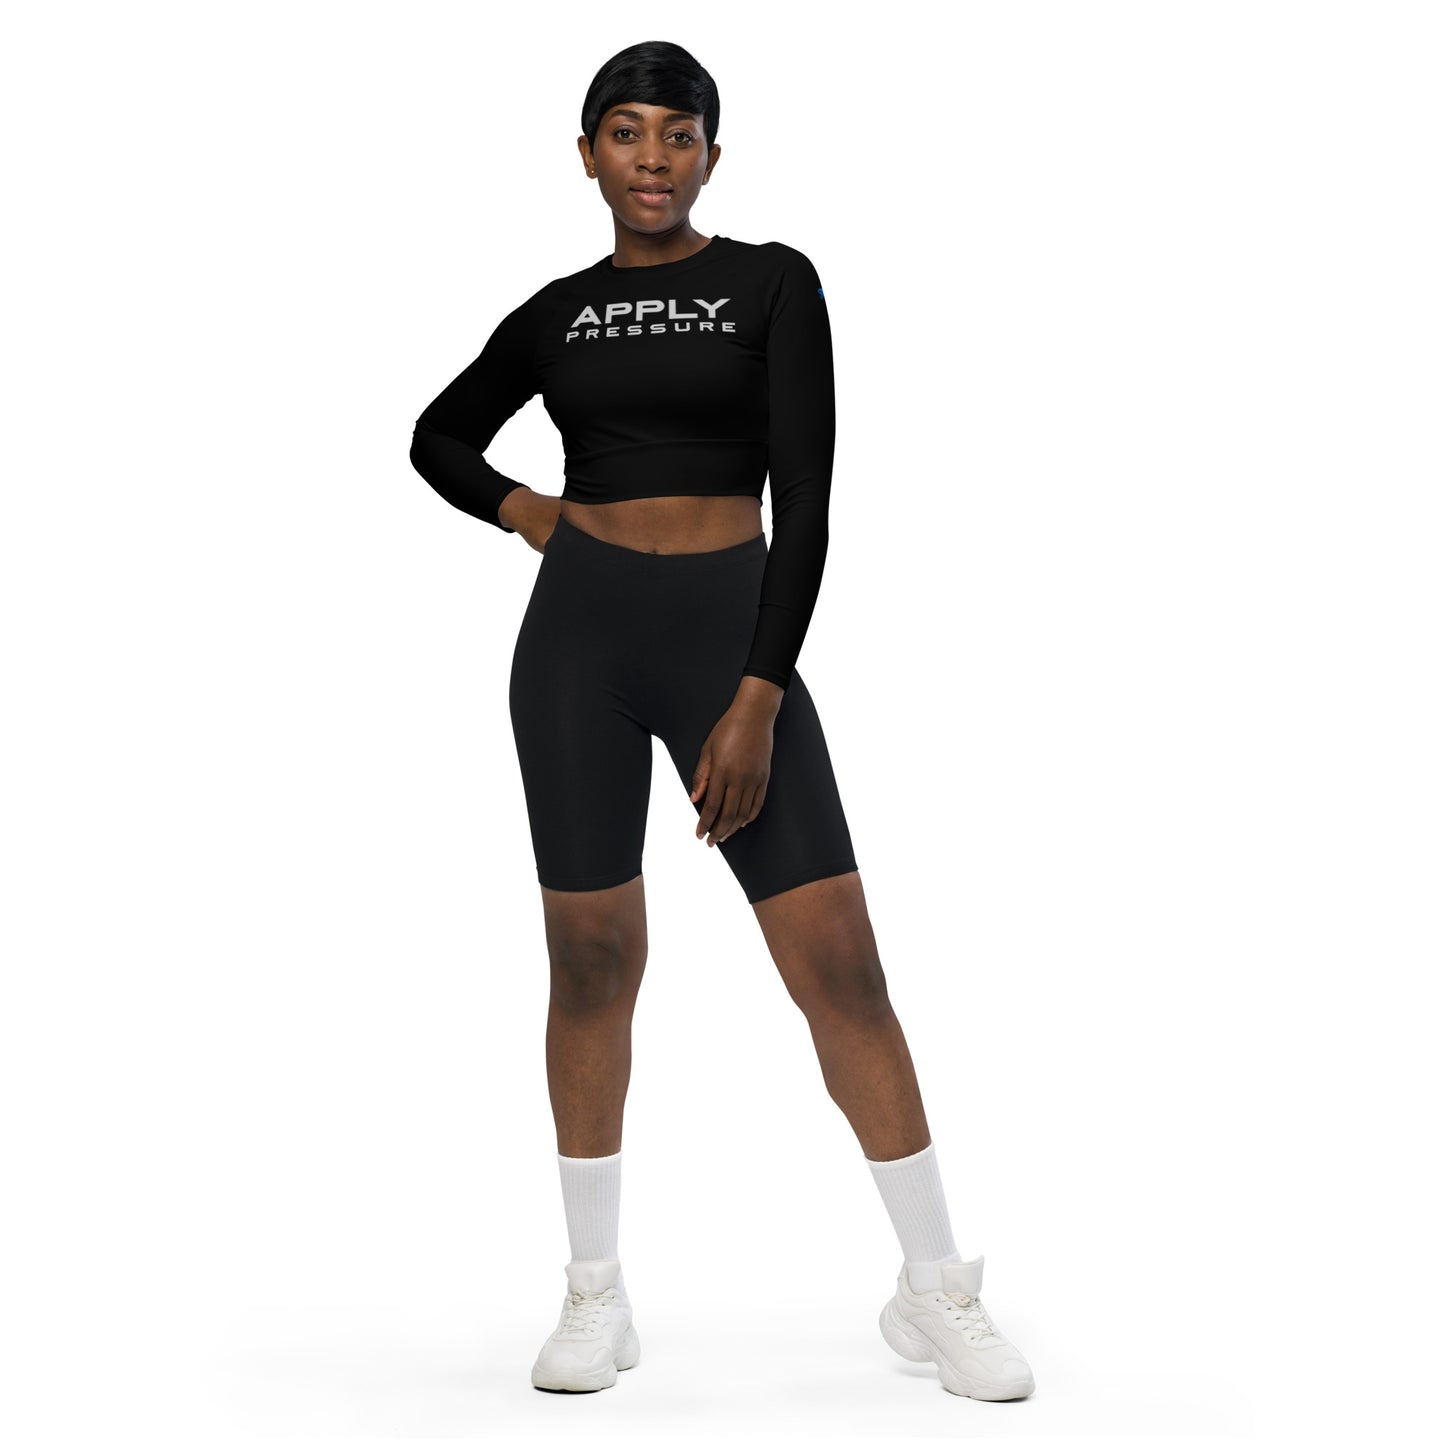 "Shatter Your Limitations" long-sleeve crop top - Apply Pressure Fitness